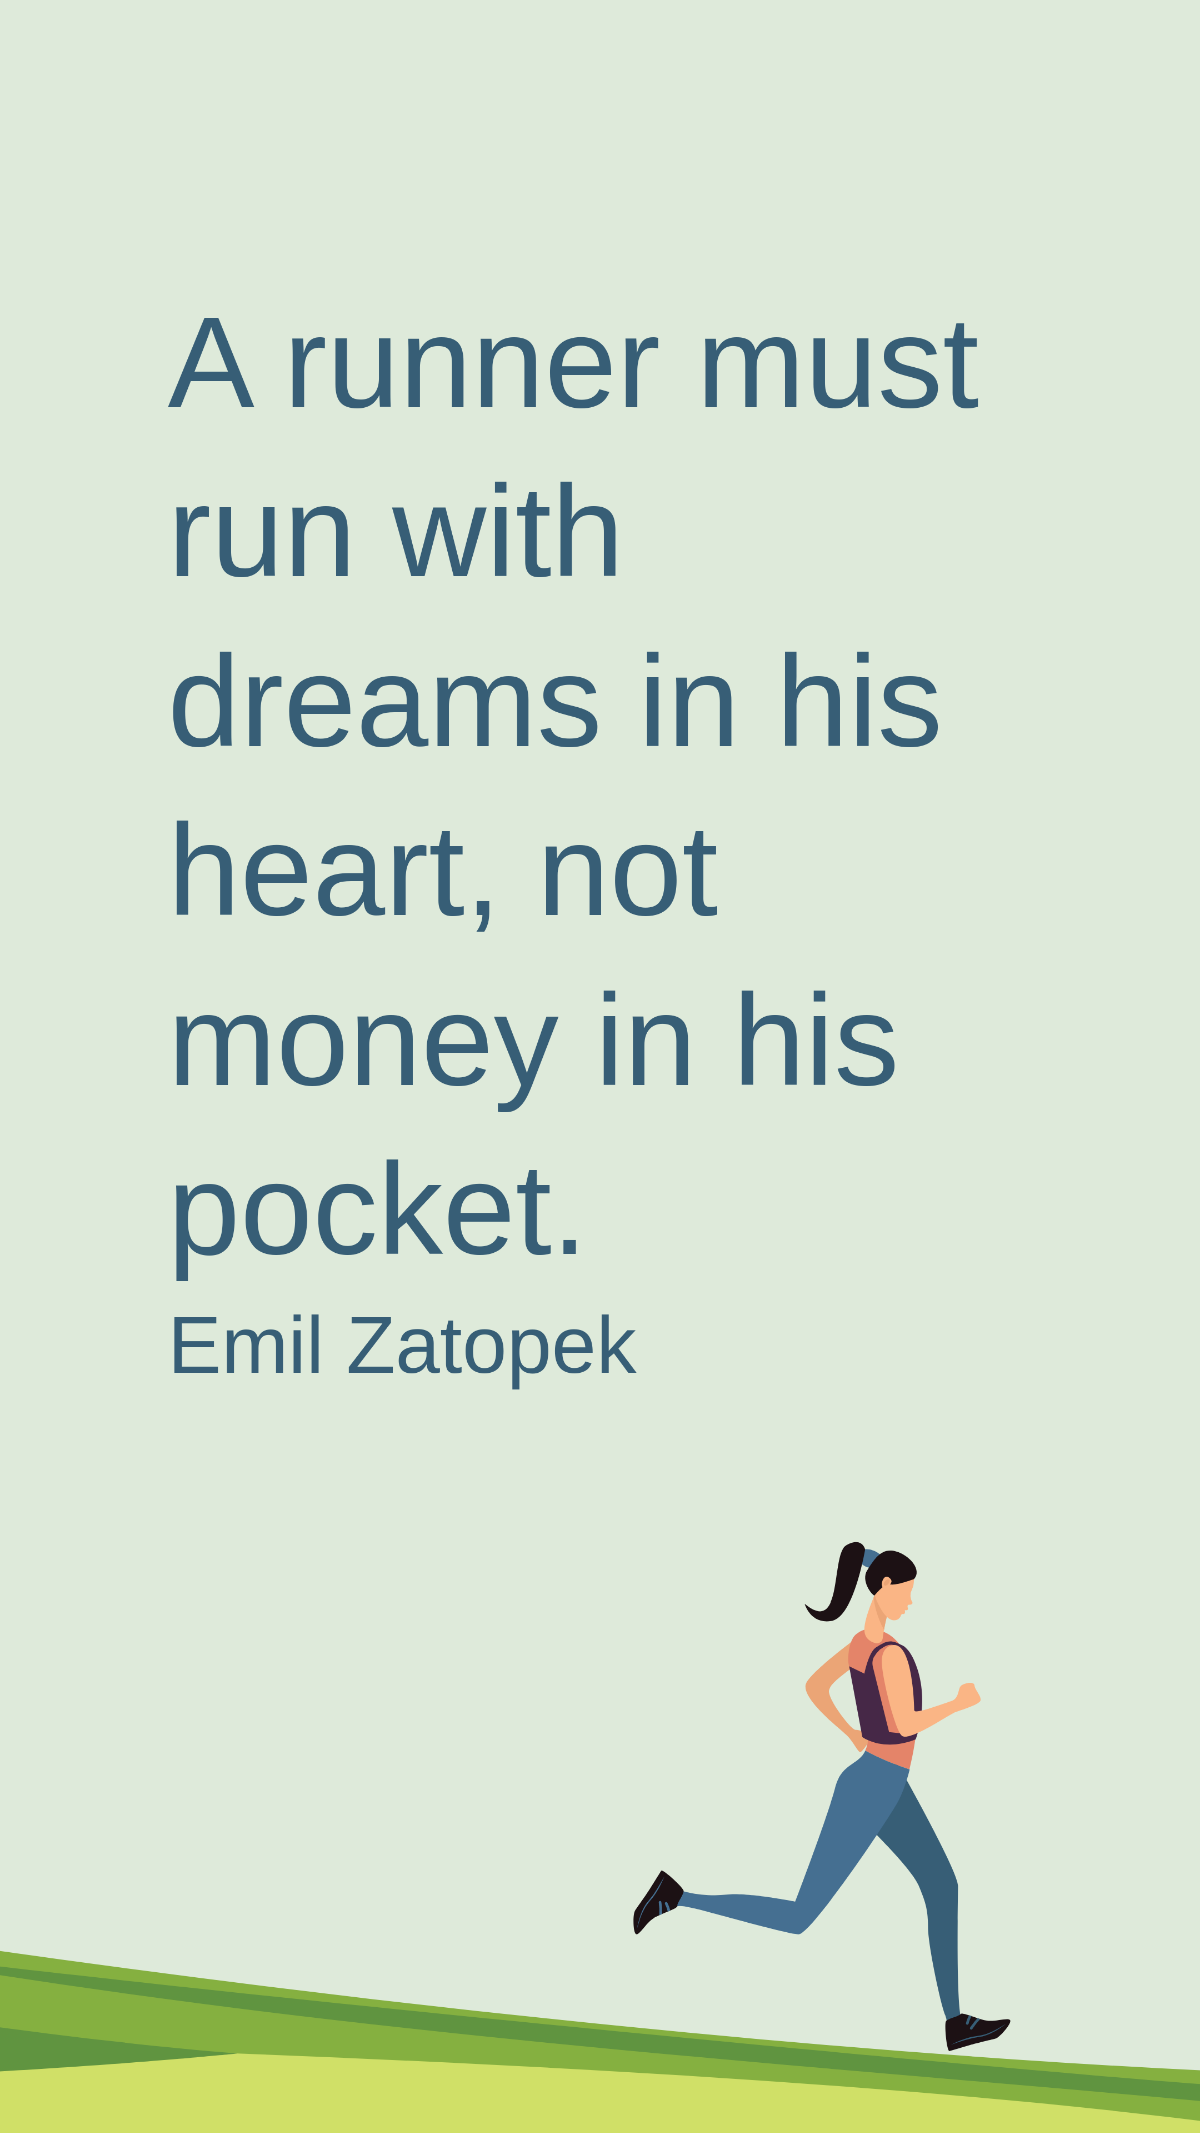 Free Emil Zatopek - A runner must run with dreams in his heart, not money in his pocket. Template